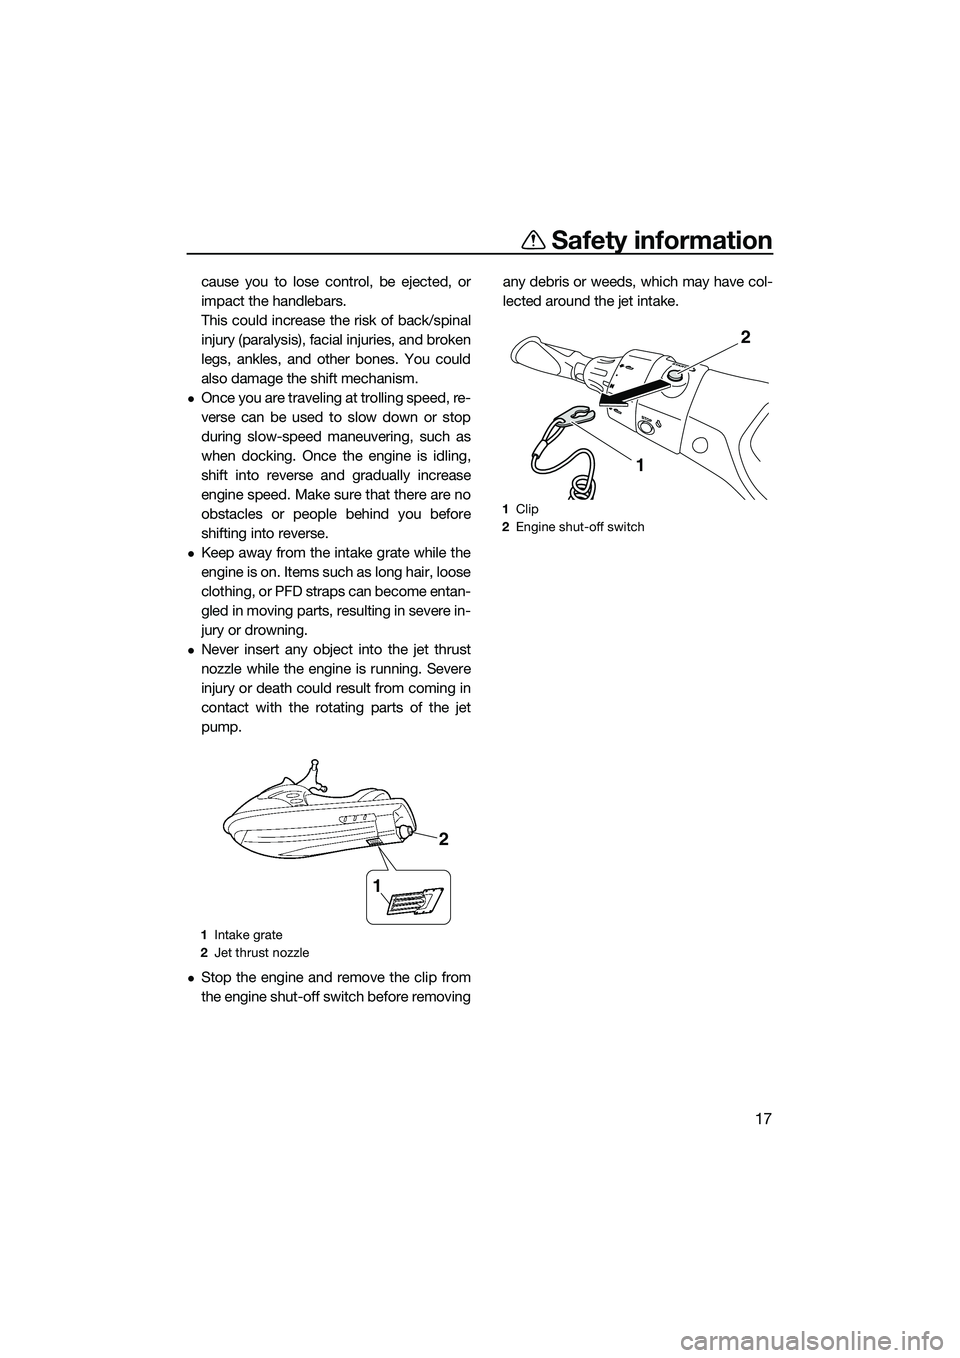 YAMAHA FX HO 2014  Owners Manual Safety information
17
cause you to lose control, be ejected, or
impact the handlebars.
This could increase the risk of back/spinal
injury (paralysis), facial injuries, and broken
legs, ankles, and oth